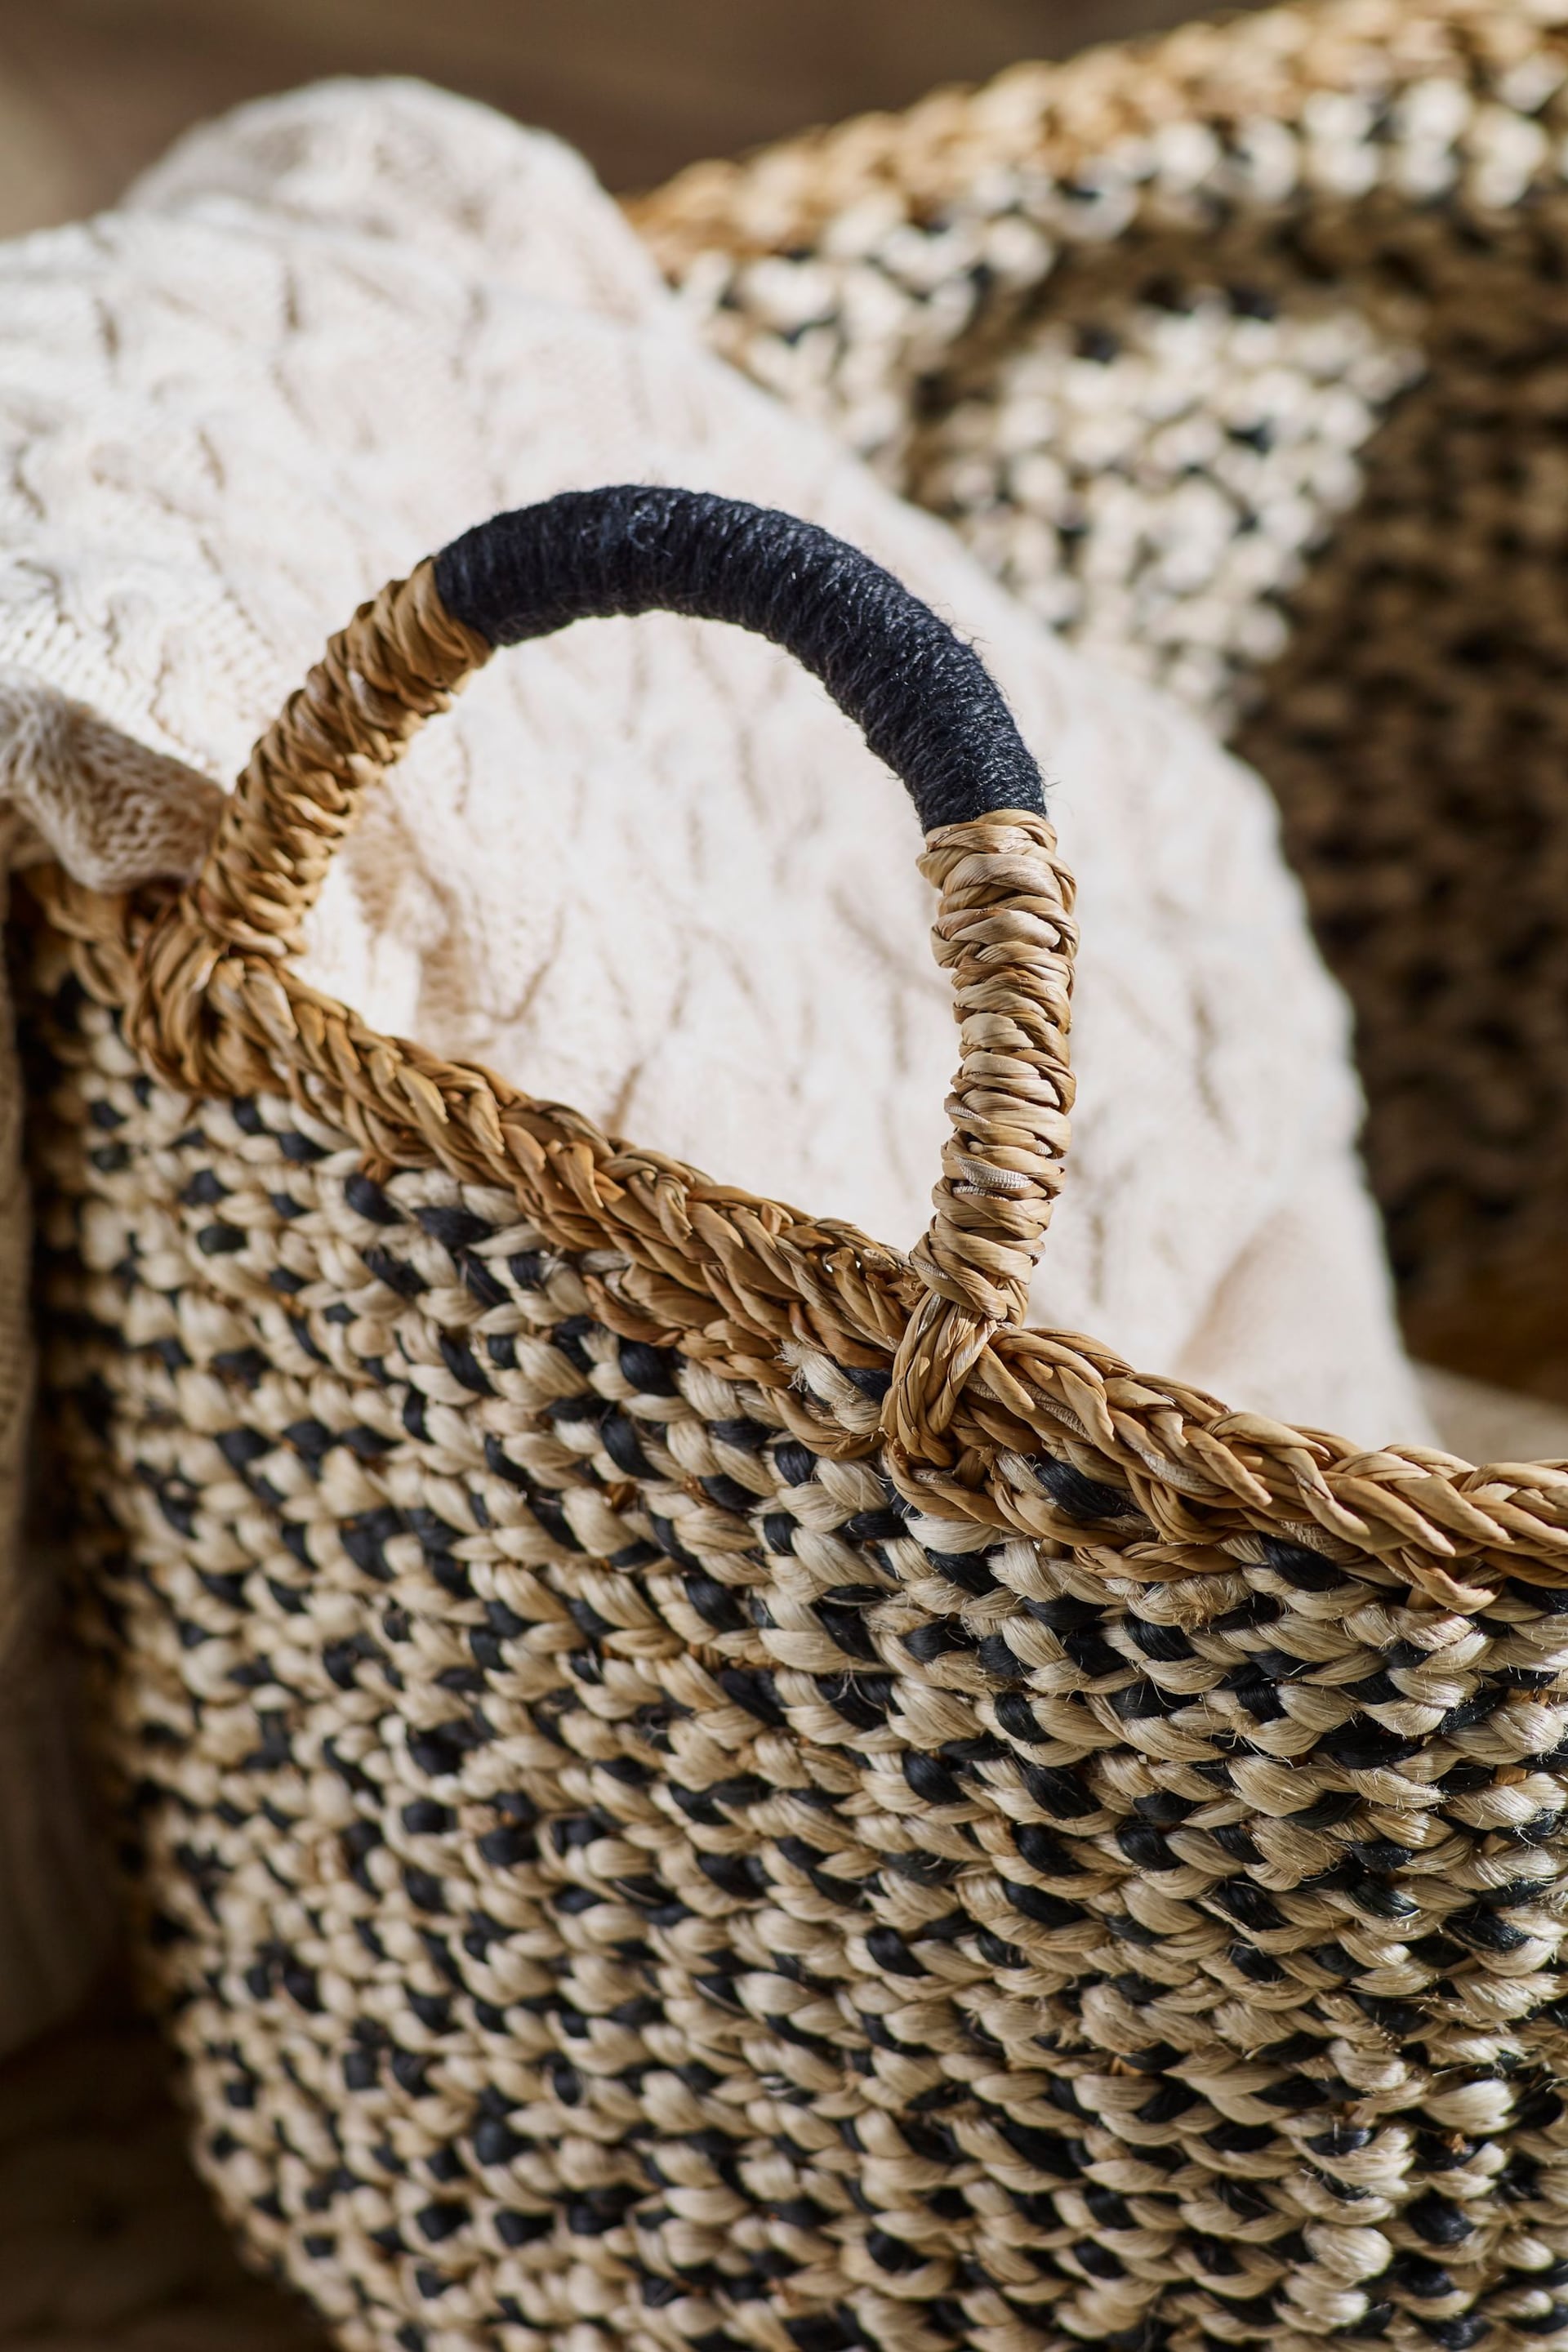 Monochrome Seagrass Bag Laundry Basket - Image 2 of 4